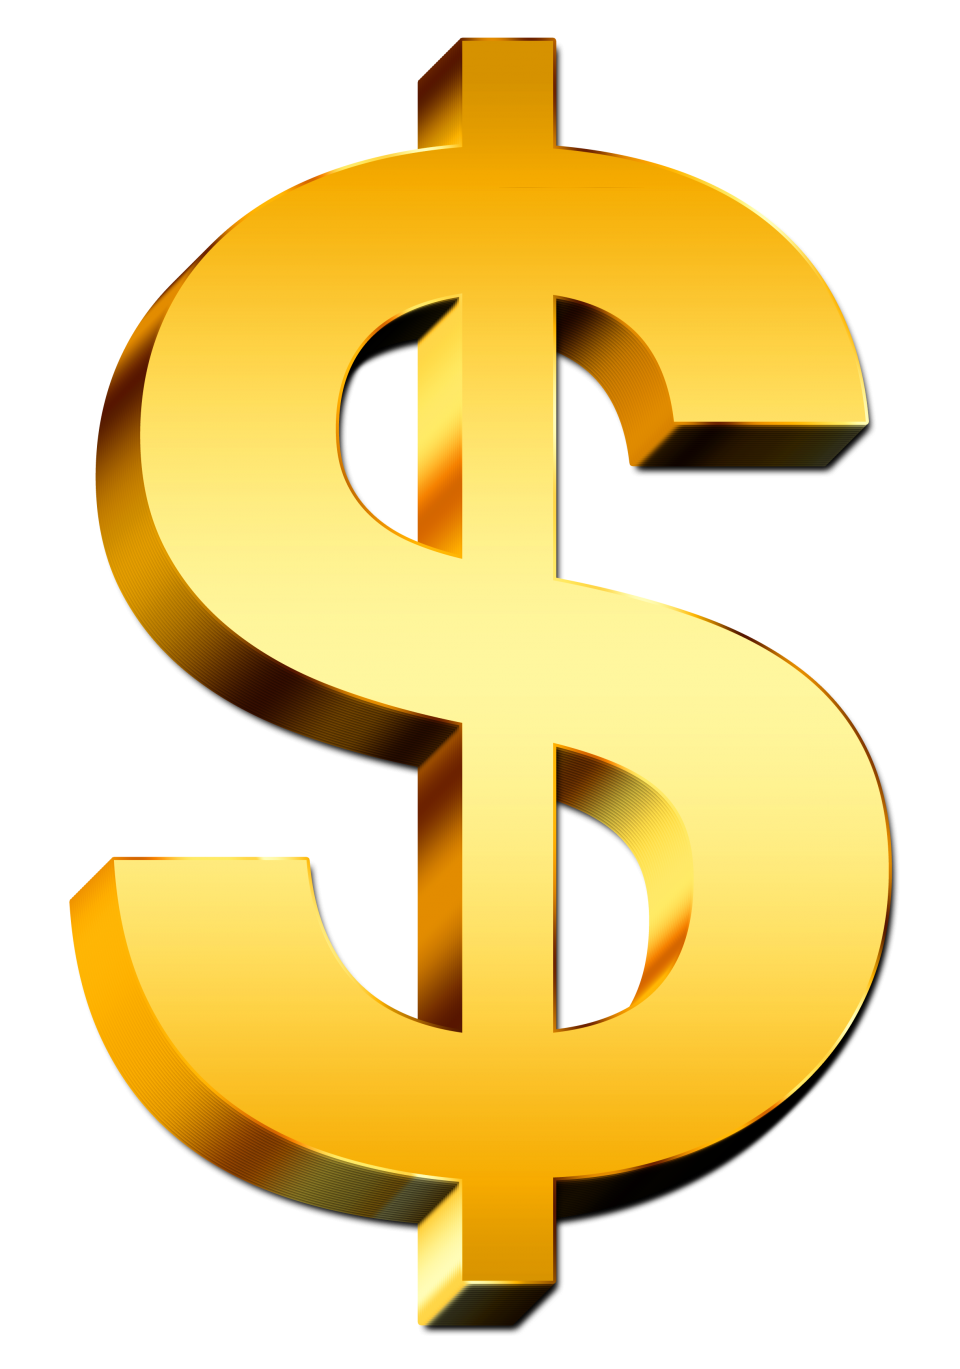 Download Dollar Sign PNG Image - PurePNG | Free transparent CC0 PNG Image Library